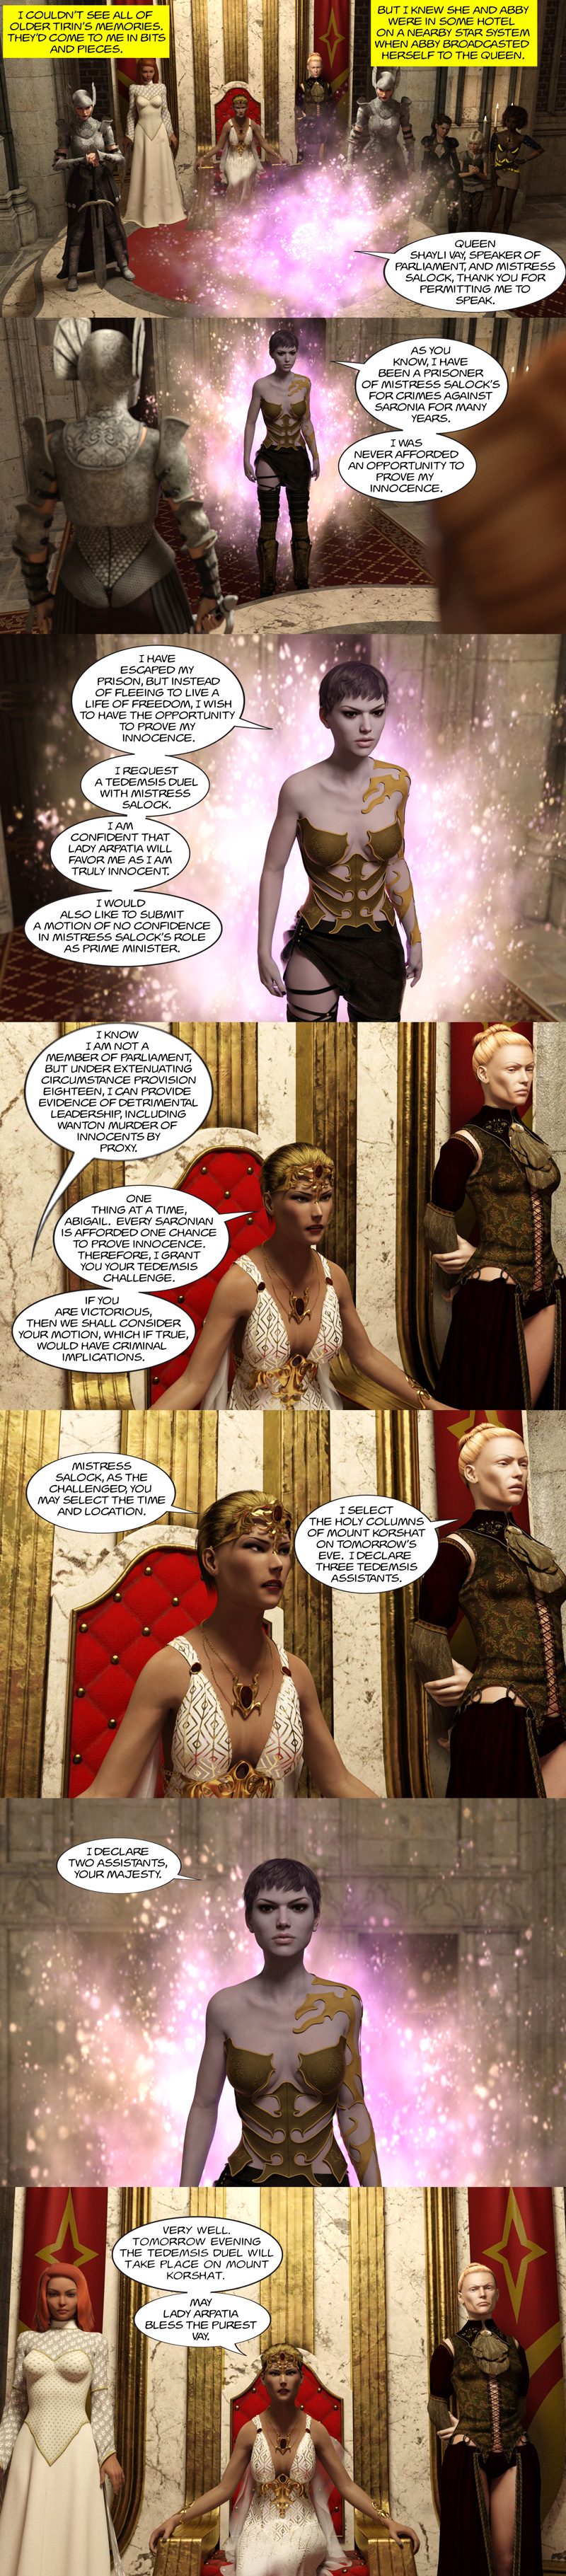 Chapter 16, page 15 – Abby requests Tedemsis Duel to prove her innocence